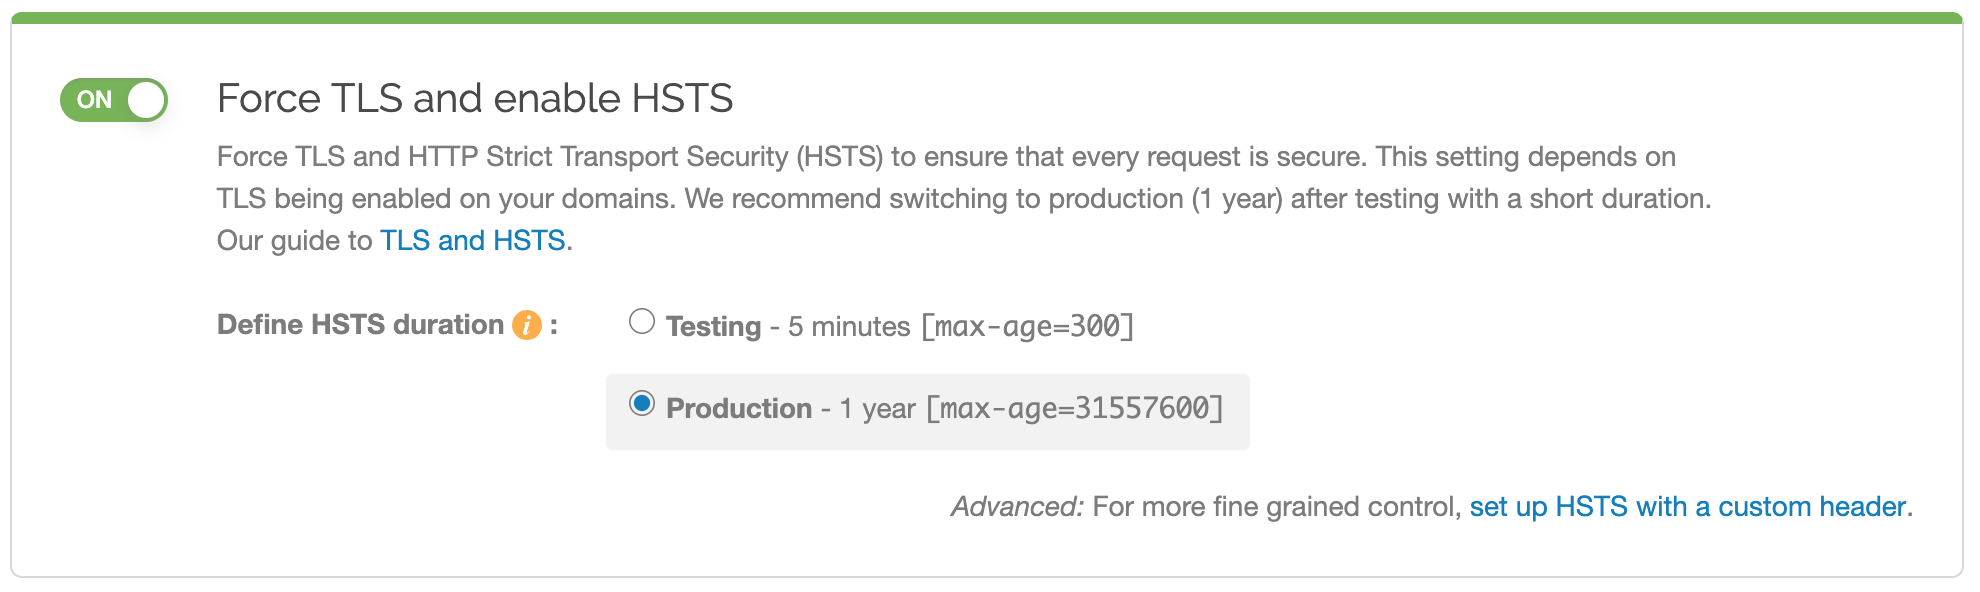 new HSTS settings